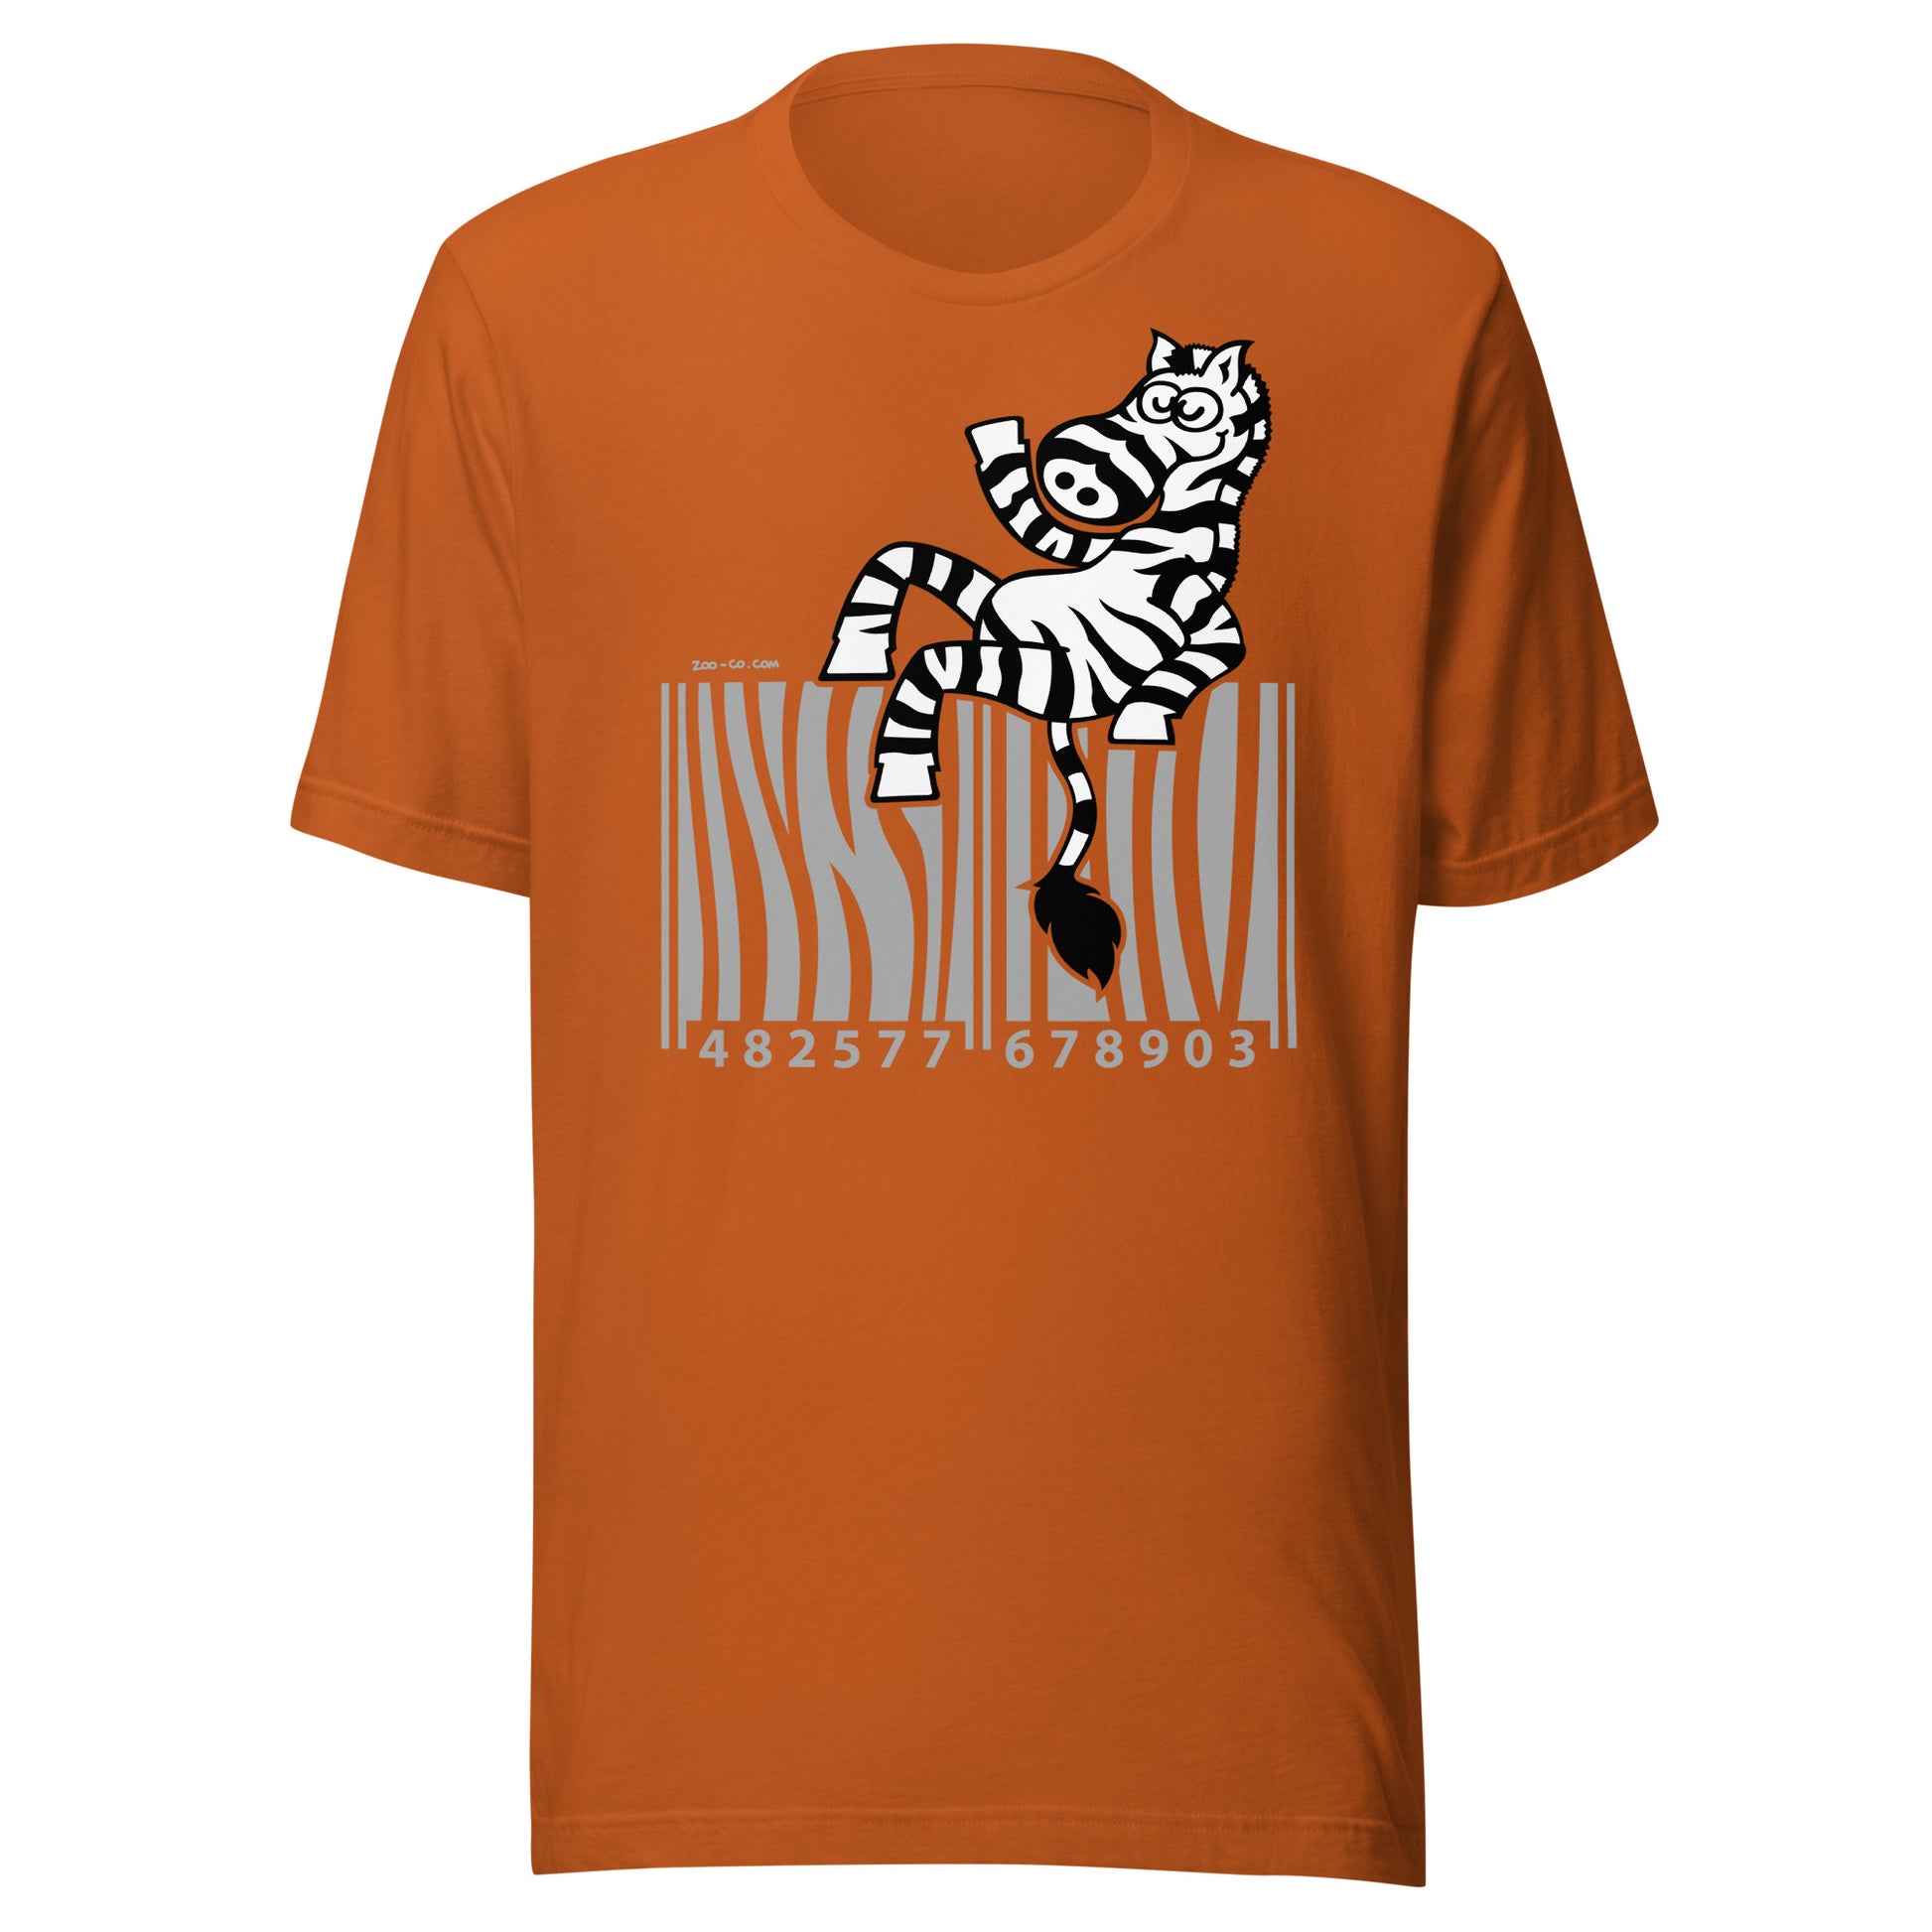 Creative barcode in waving zebra mode Unisex t-shirt. Autumn color. Front view